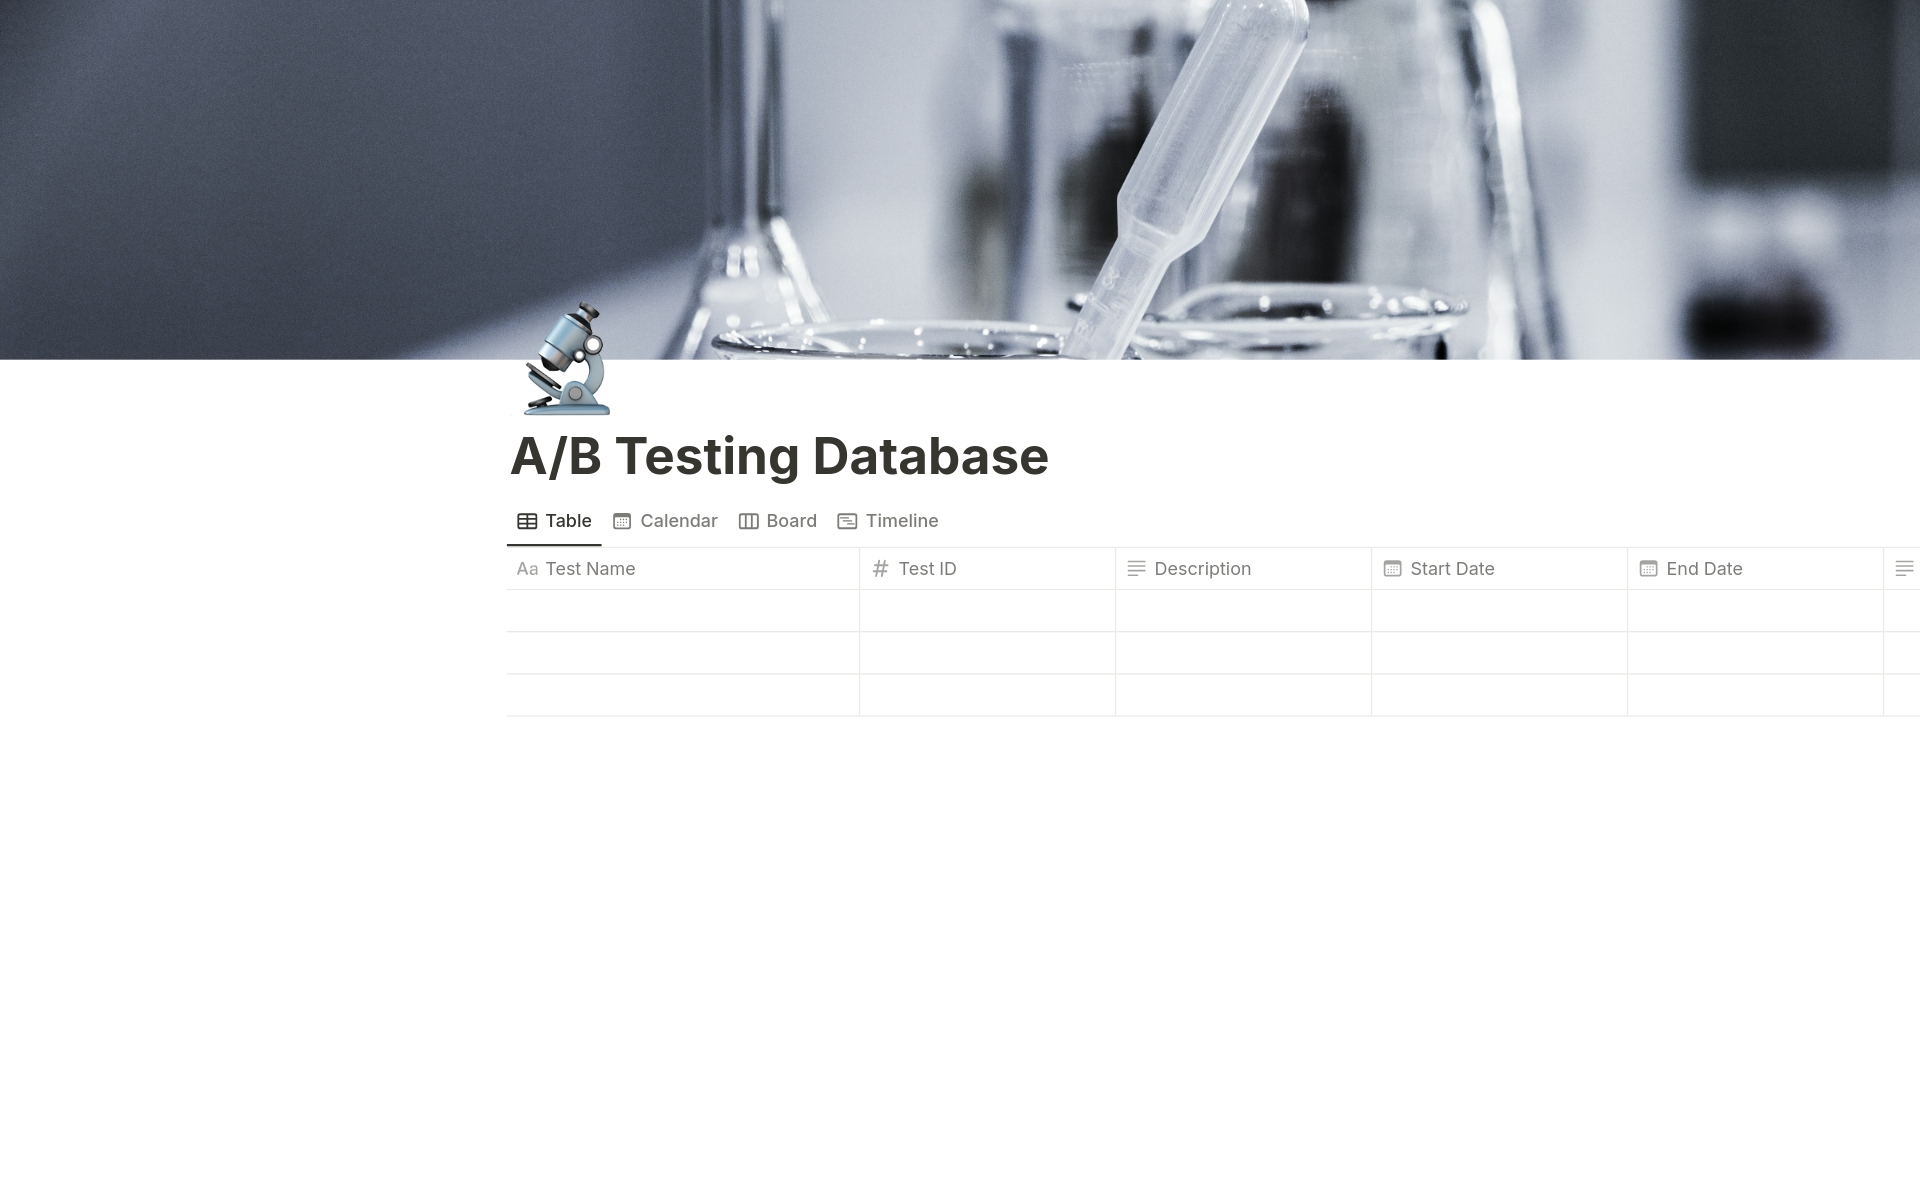 An A/B testing database is a specialized system designed to store and manage data related to A/B tests, which are experiments comparing two versions (A and B) to determine which performs better in terms of a specified metric, such as conversion rate and click-through rate.